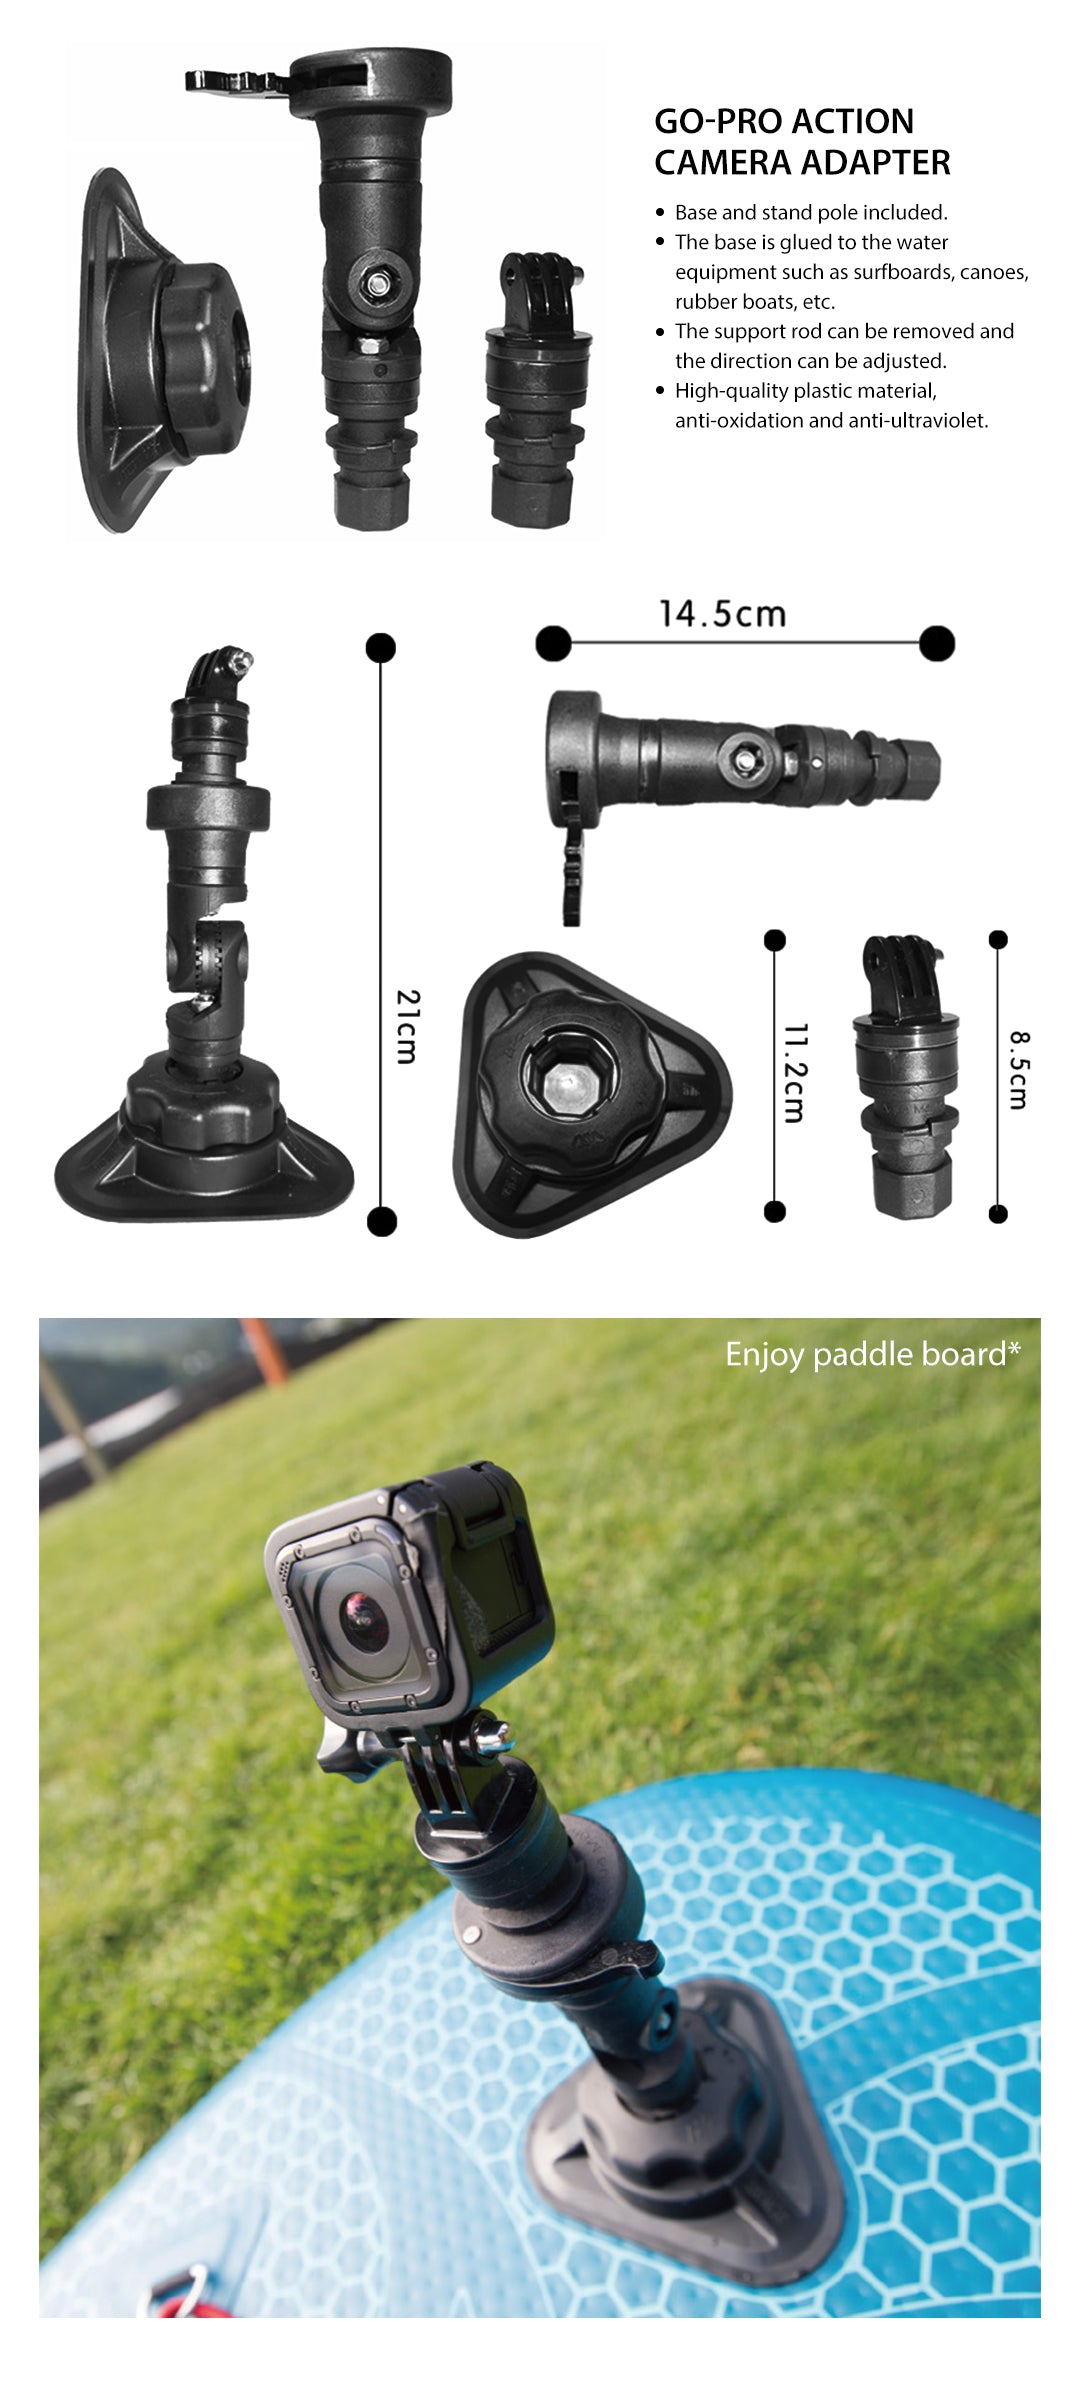 Go-Pro Action Camera Adapter Camera Mount For Paadle Board | SUPZOOM